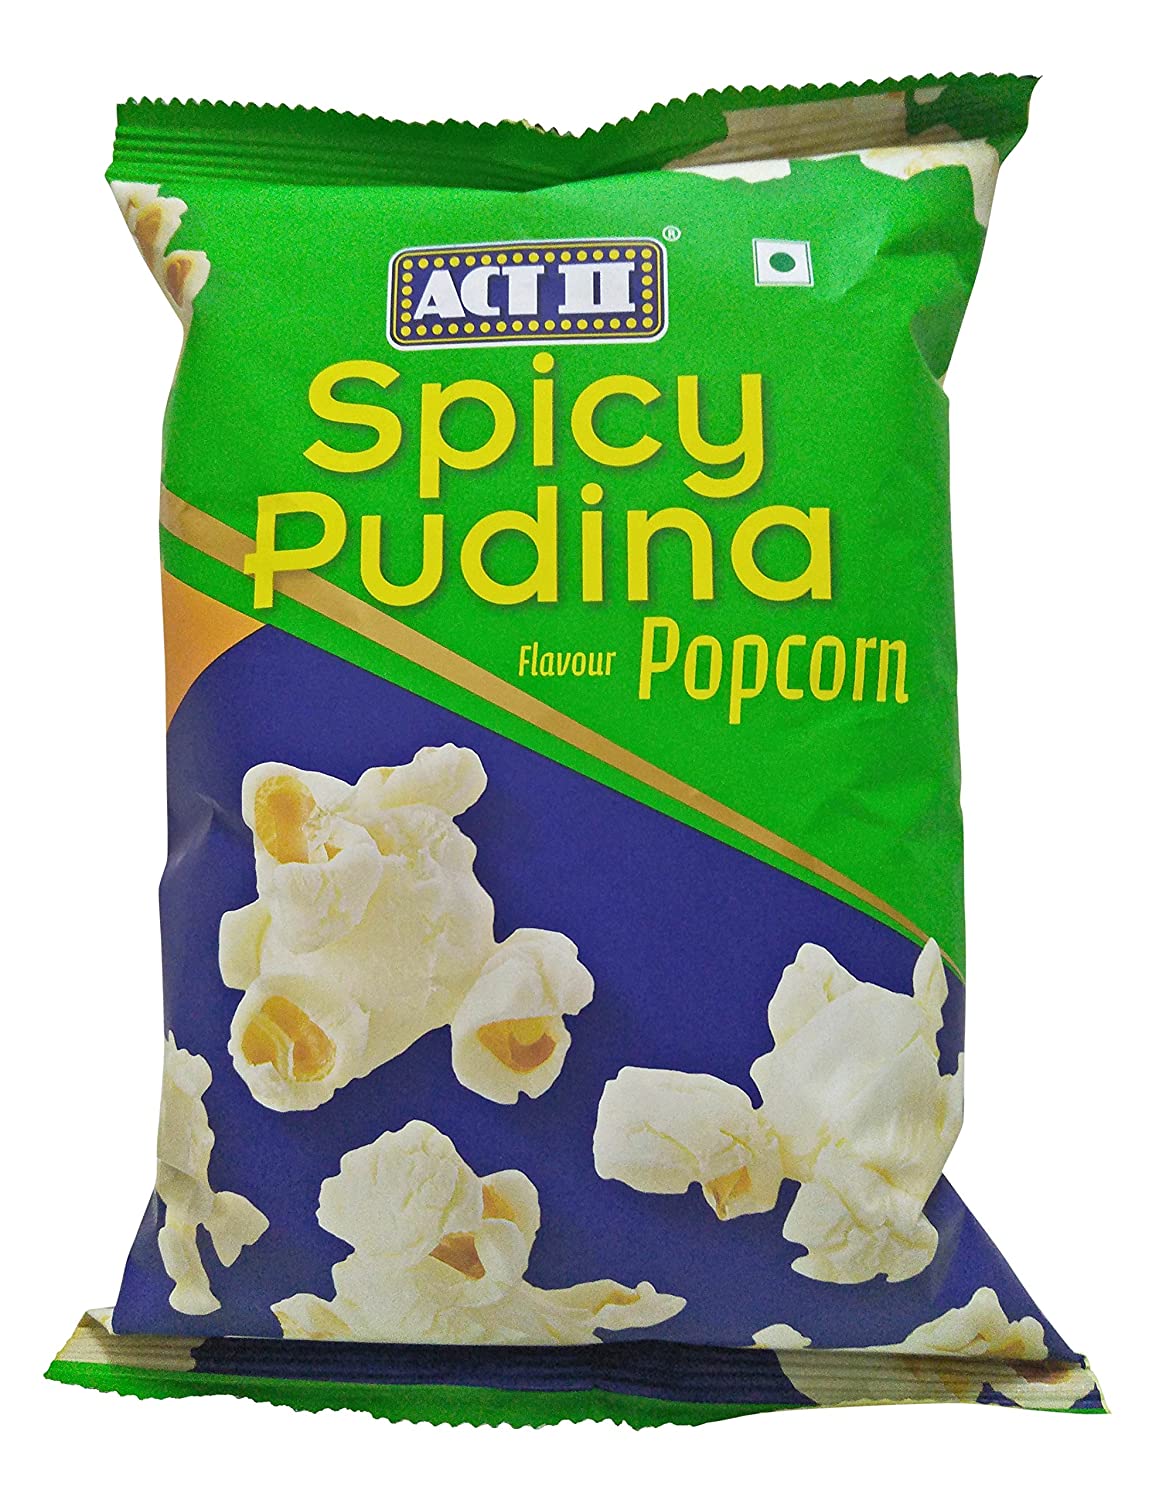 ACT II spicy pudina flavour popcorn